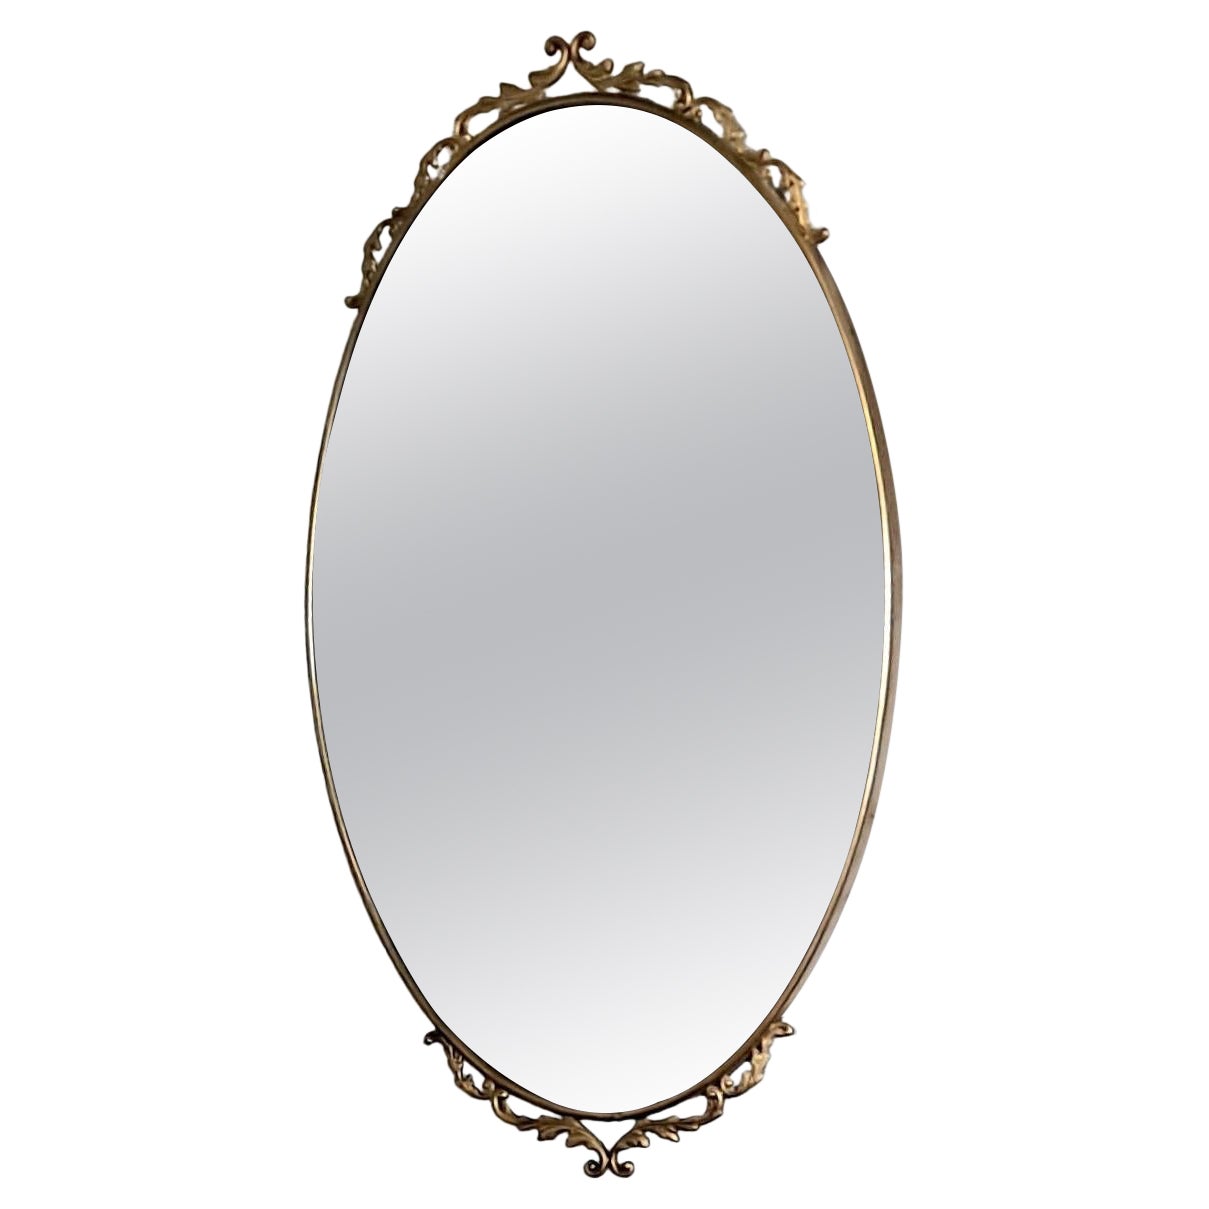 Italian Brass Mirror with the Filigree on Top and Bottom